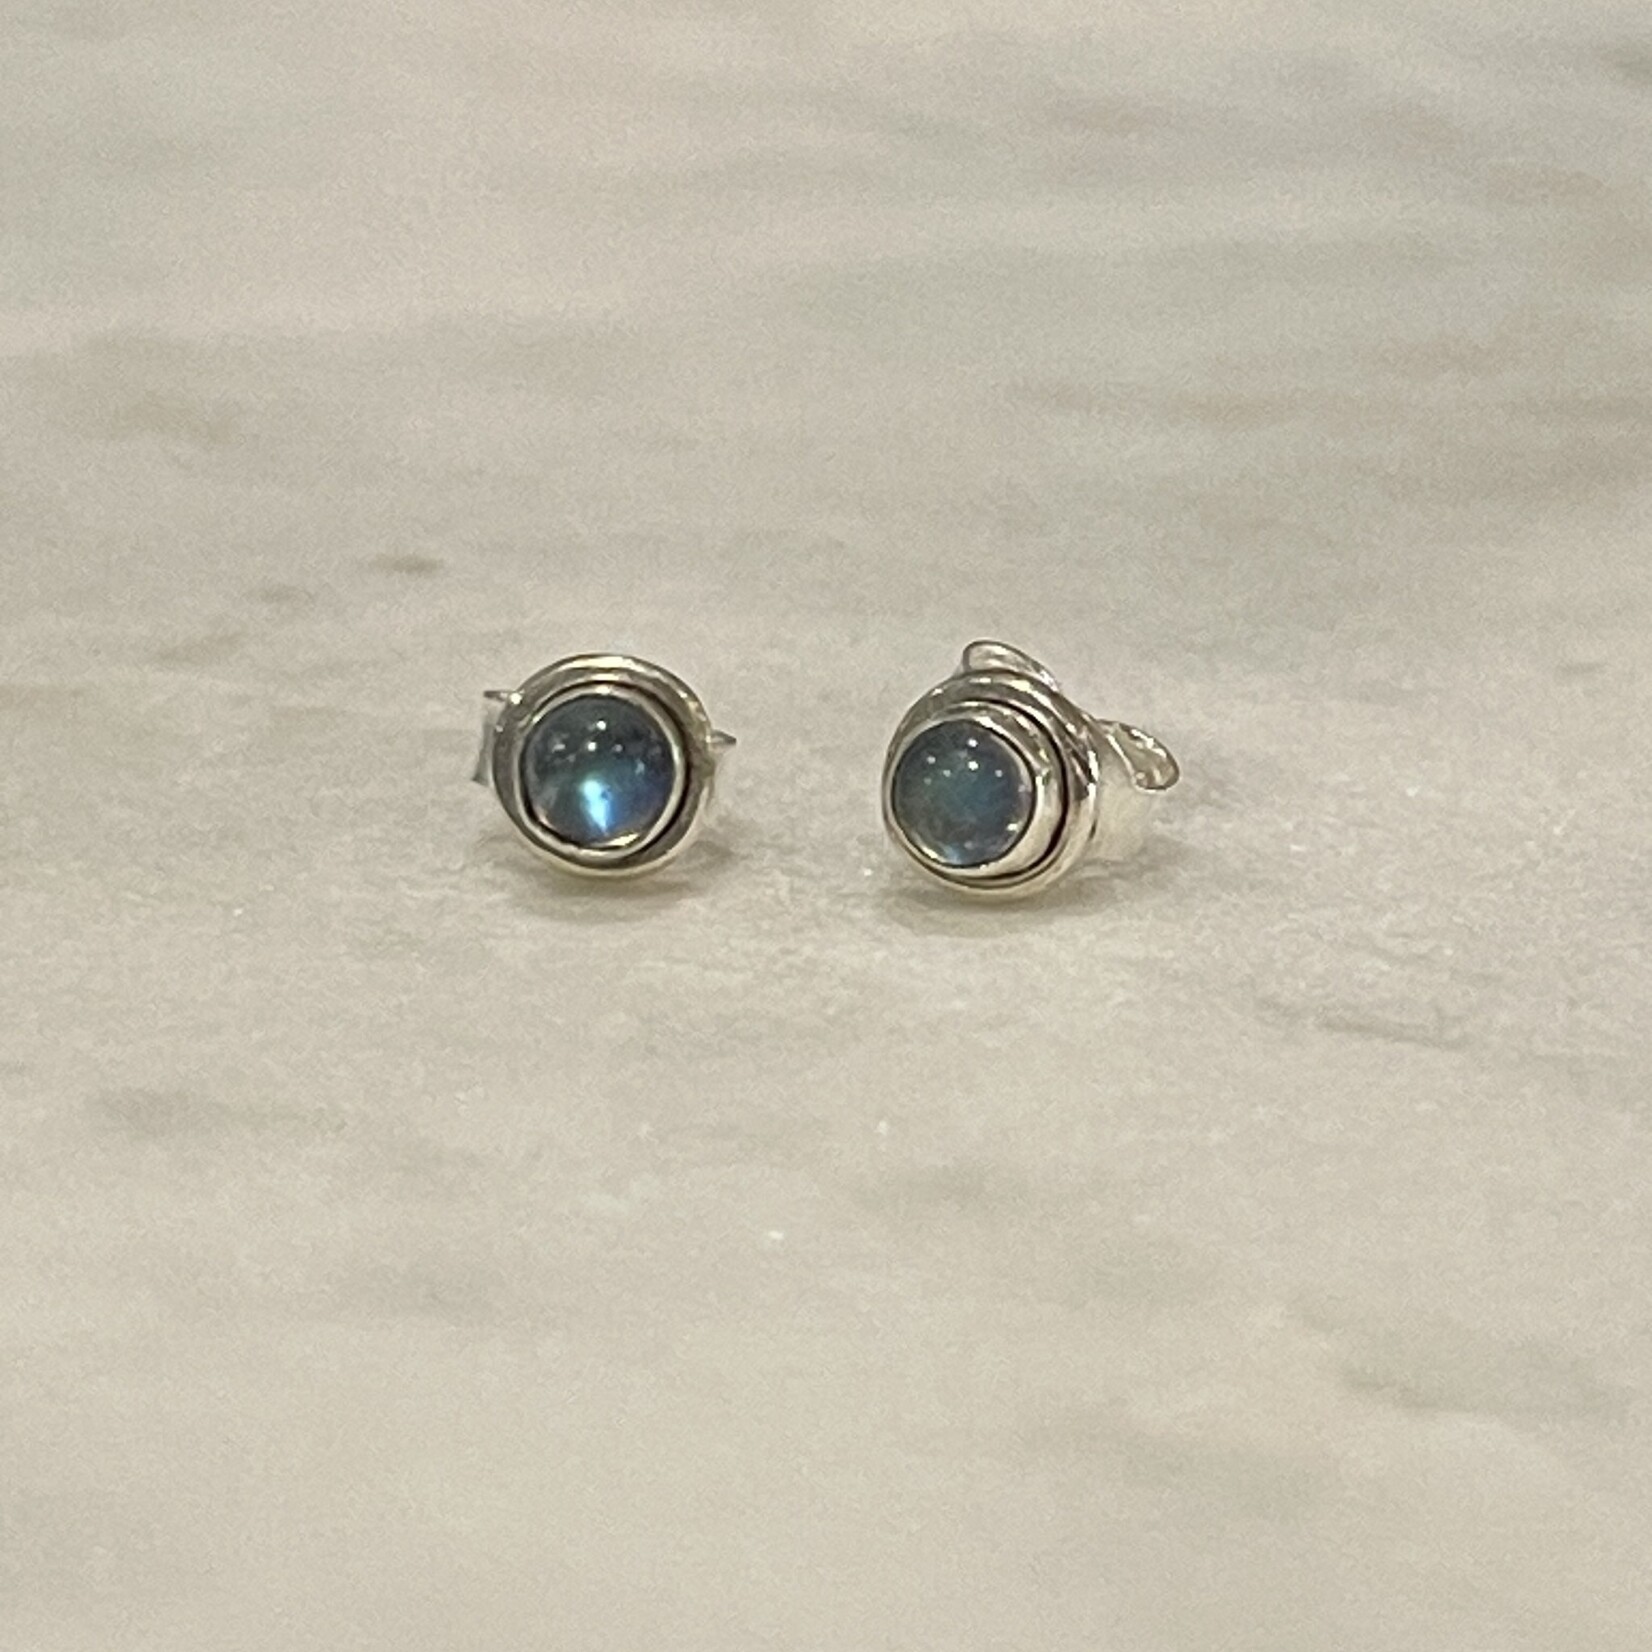 Tiny Round Labradorite Sterling Silver Stud Earrings